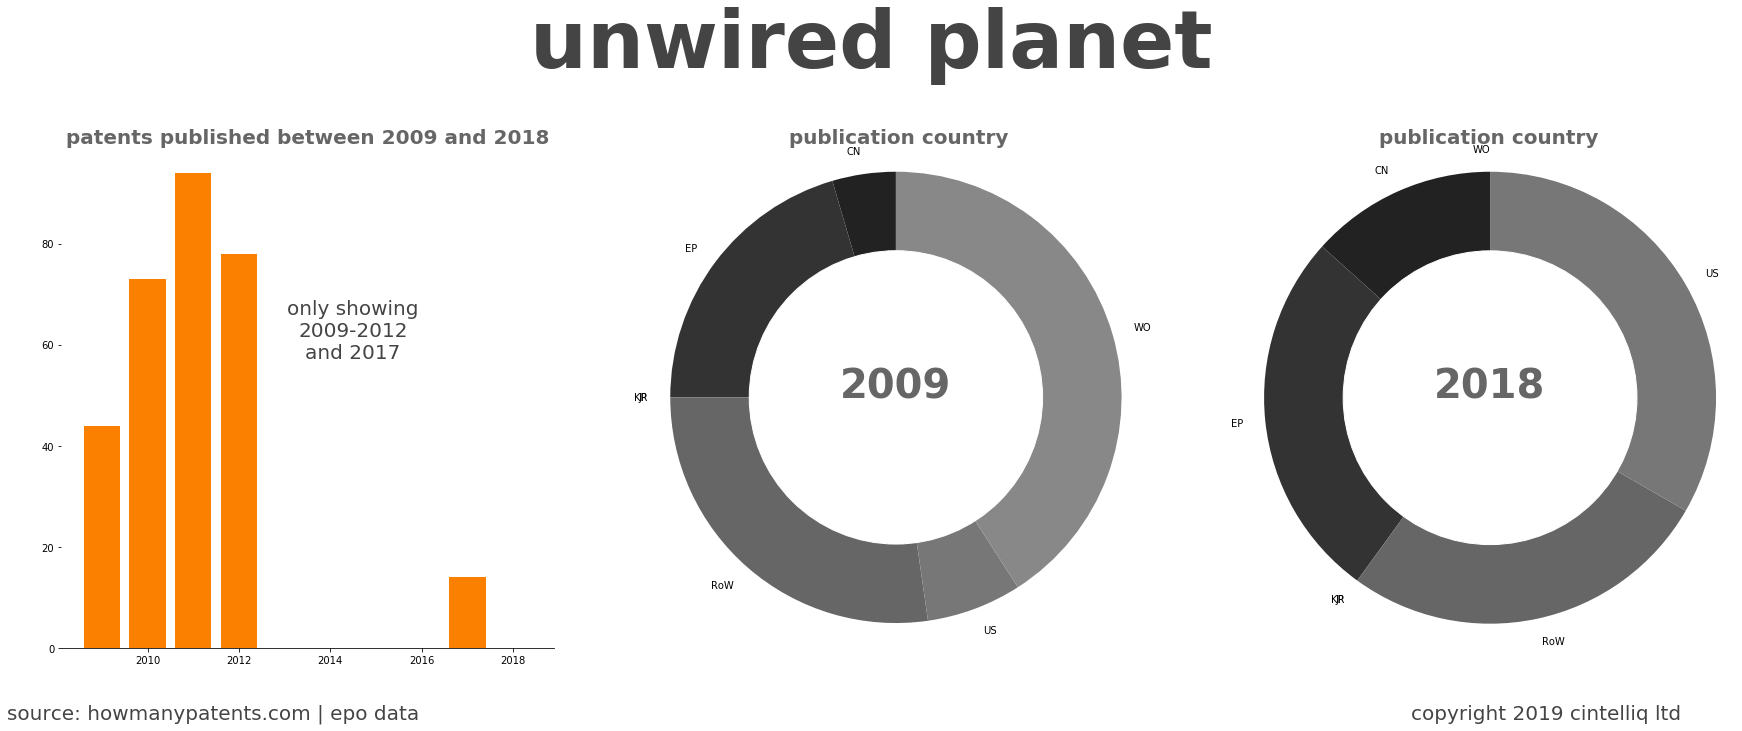 summary of patents for Unwired Planet